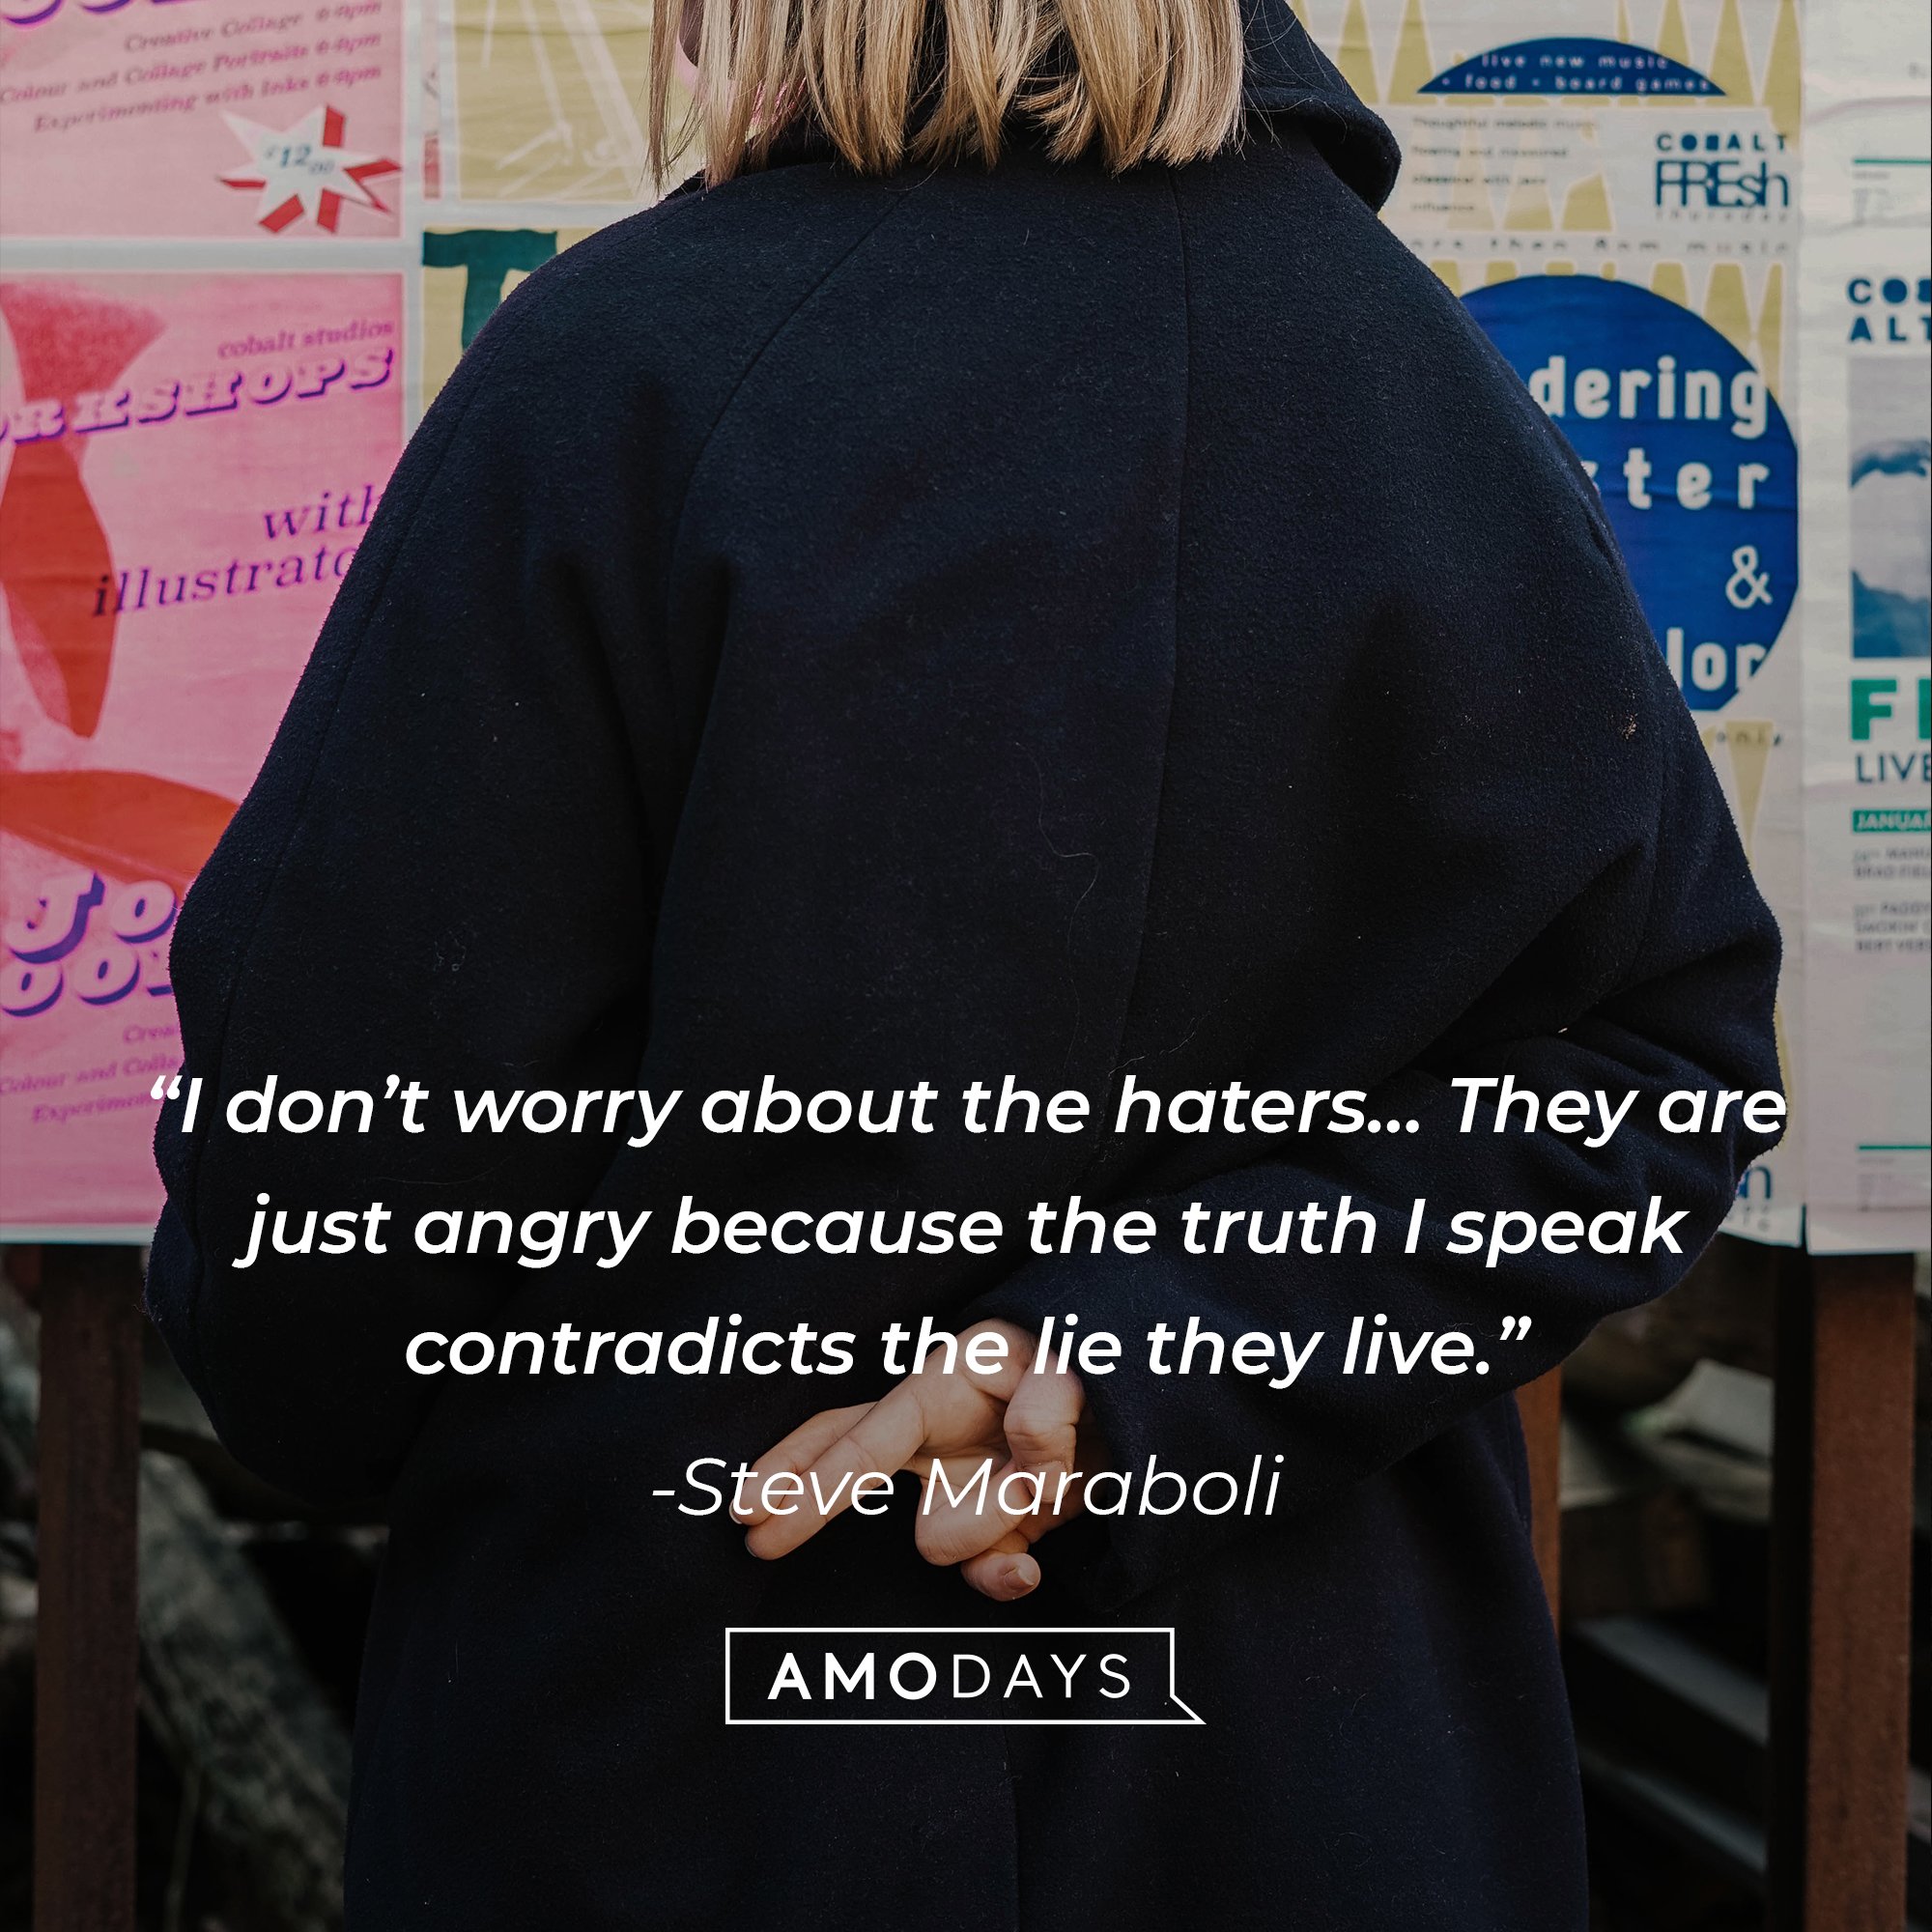 Steve Maraboli’s quote: “I don’t worry about the haters… They are just angry because the truth I speak contradicts the lie they live.” | Image: Amodays  